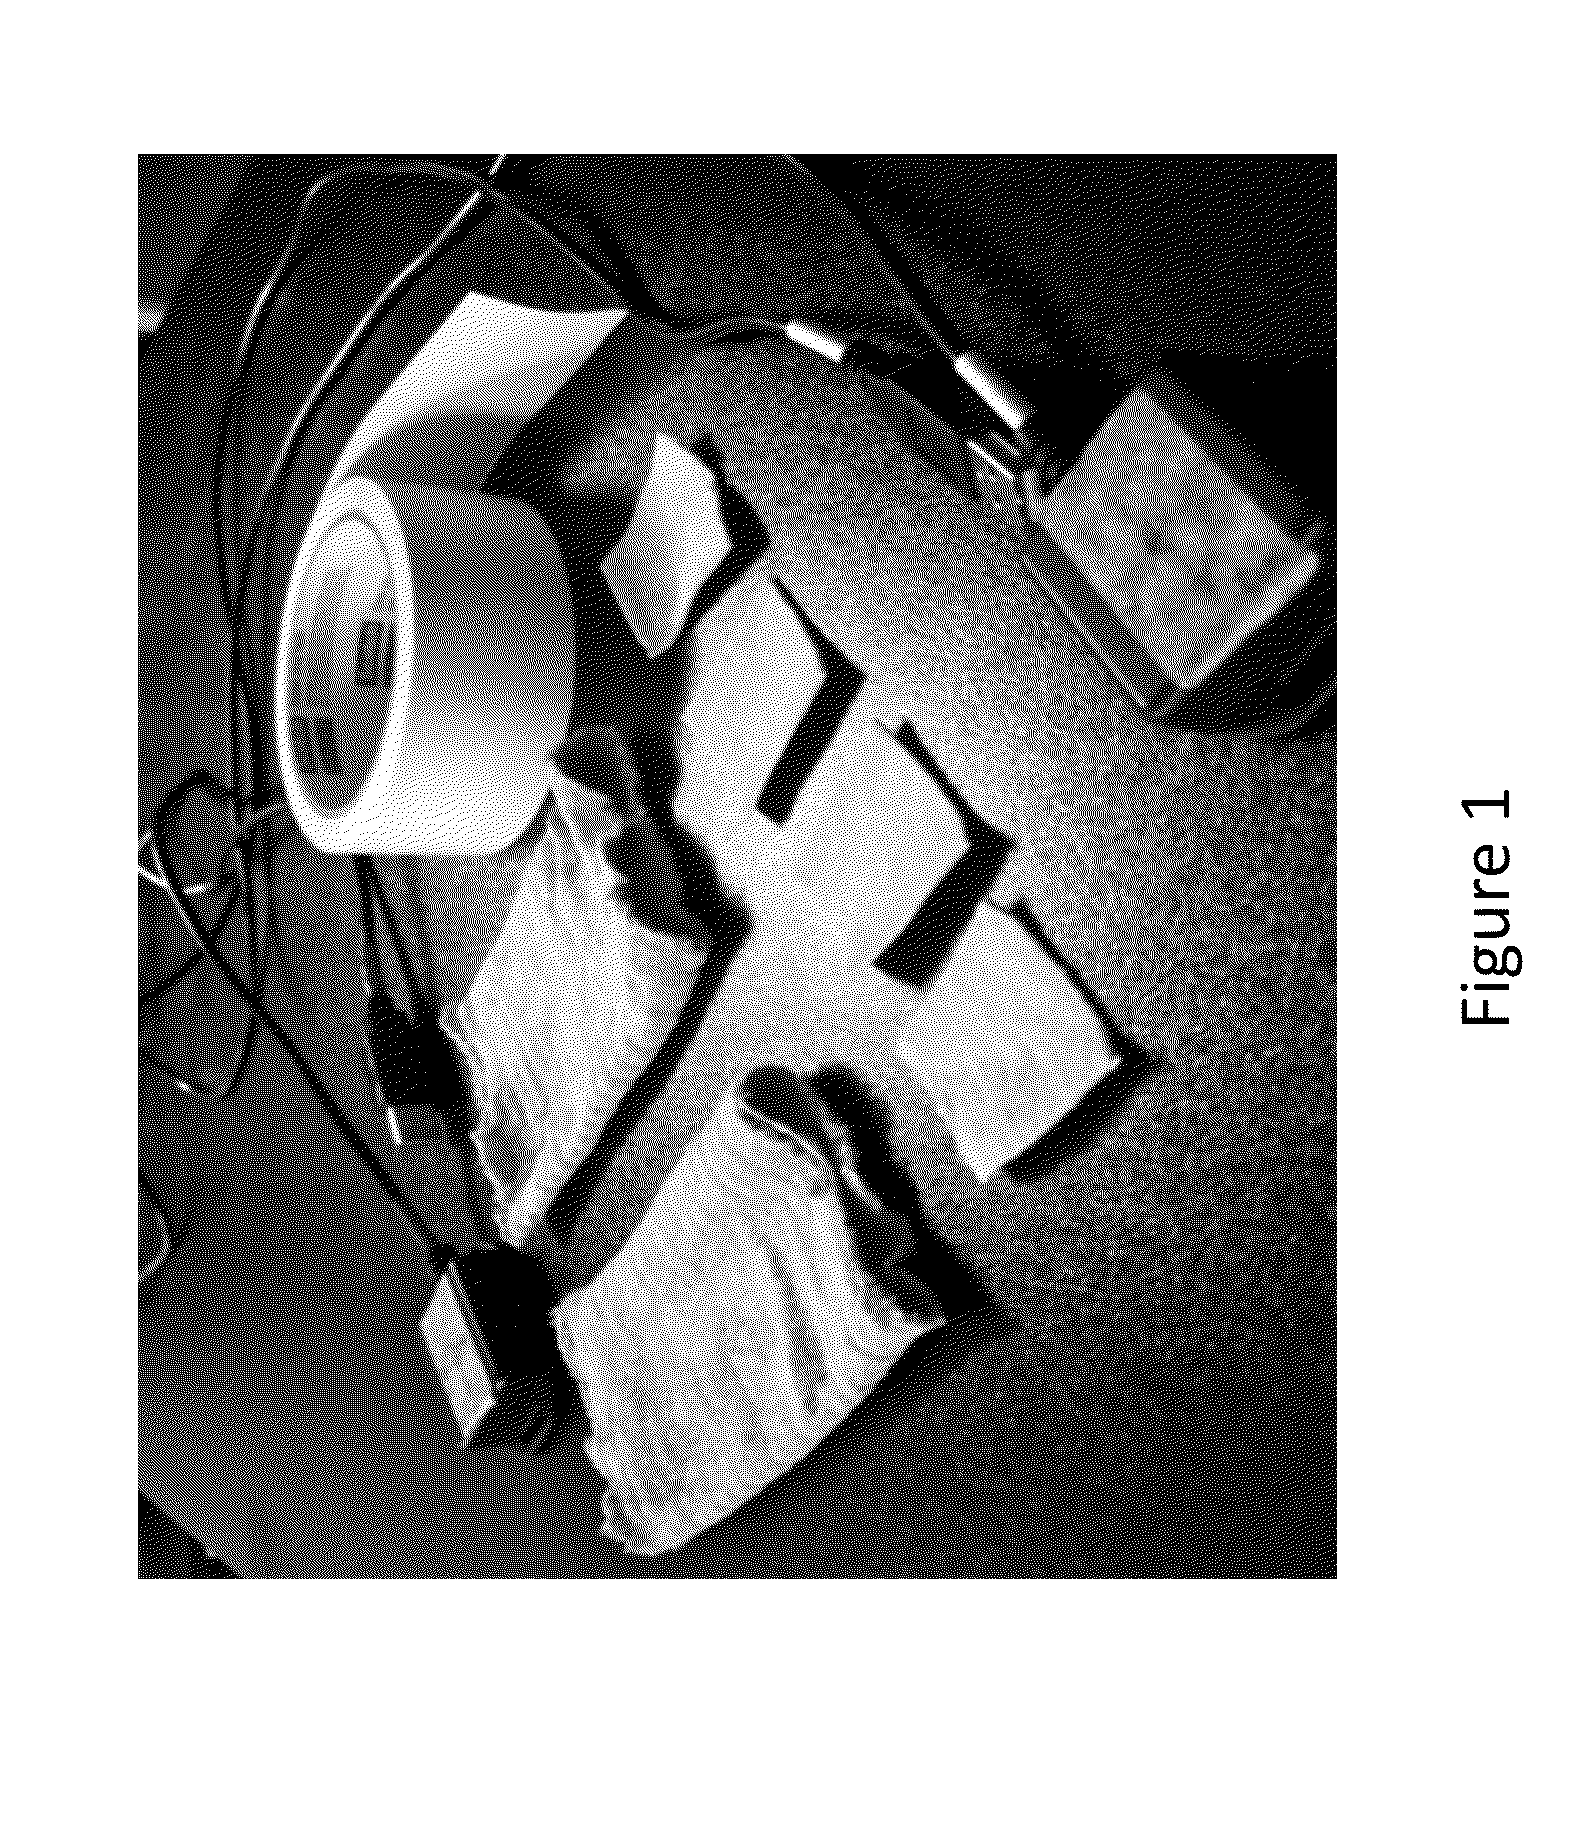 Electronic-Movement Analysis Tool for Motor Control Rehabilitation and Method of Using the Same